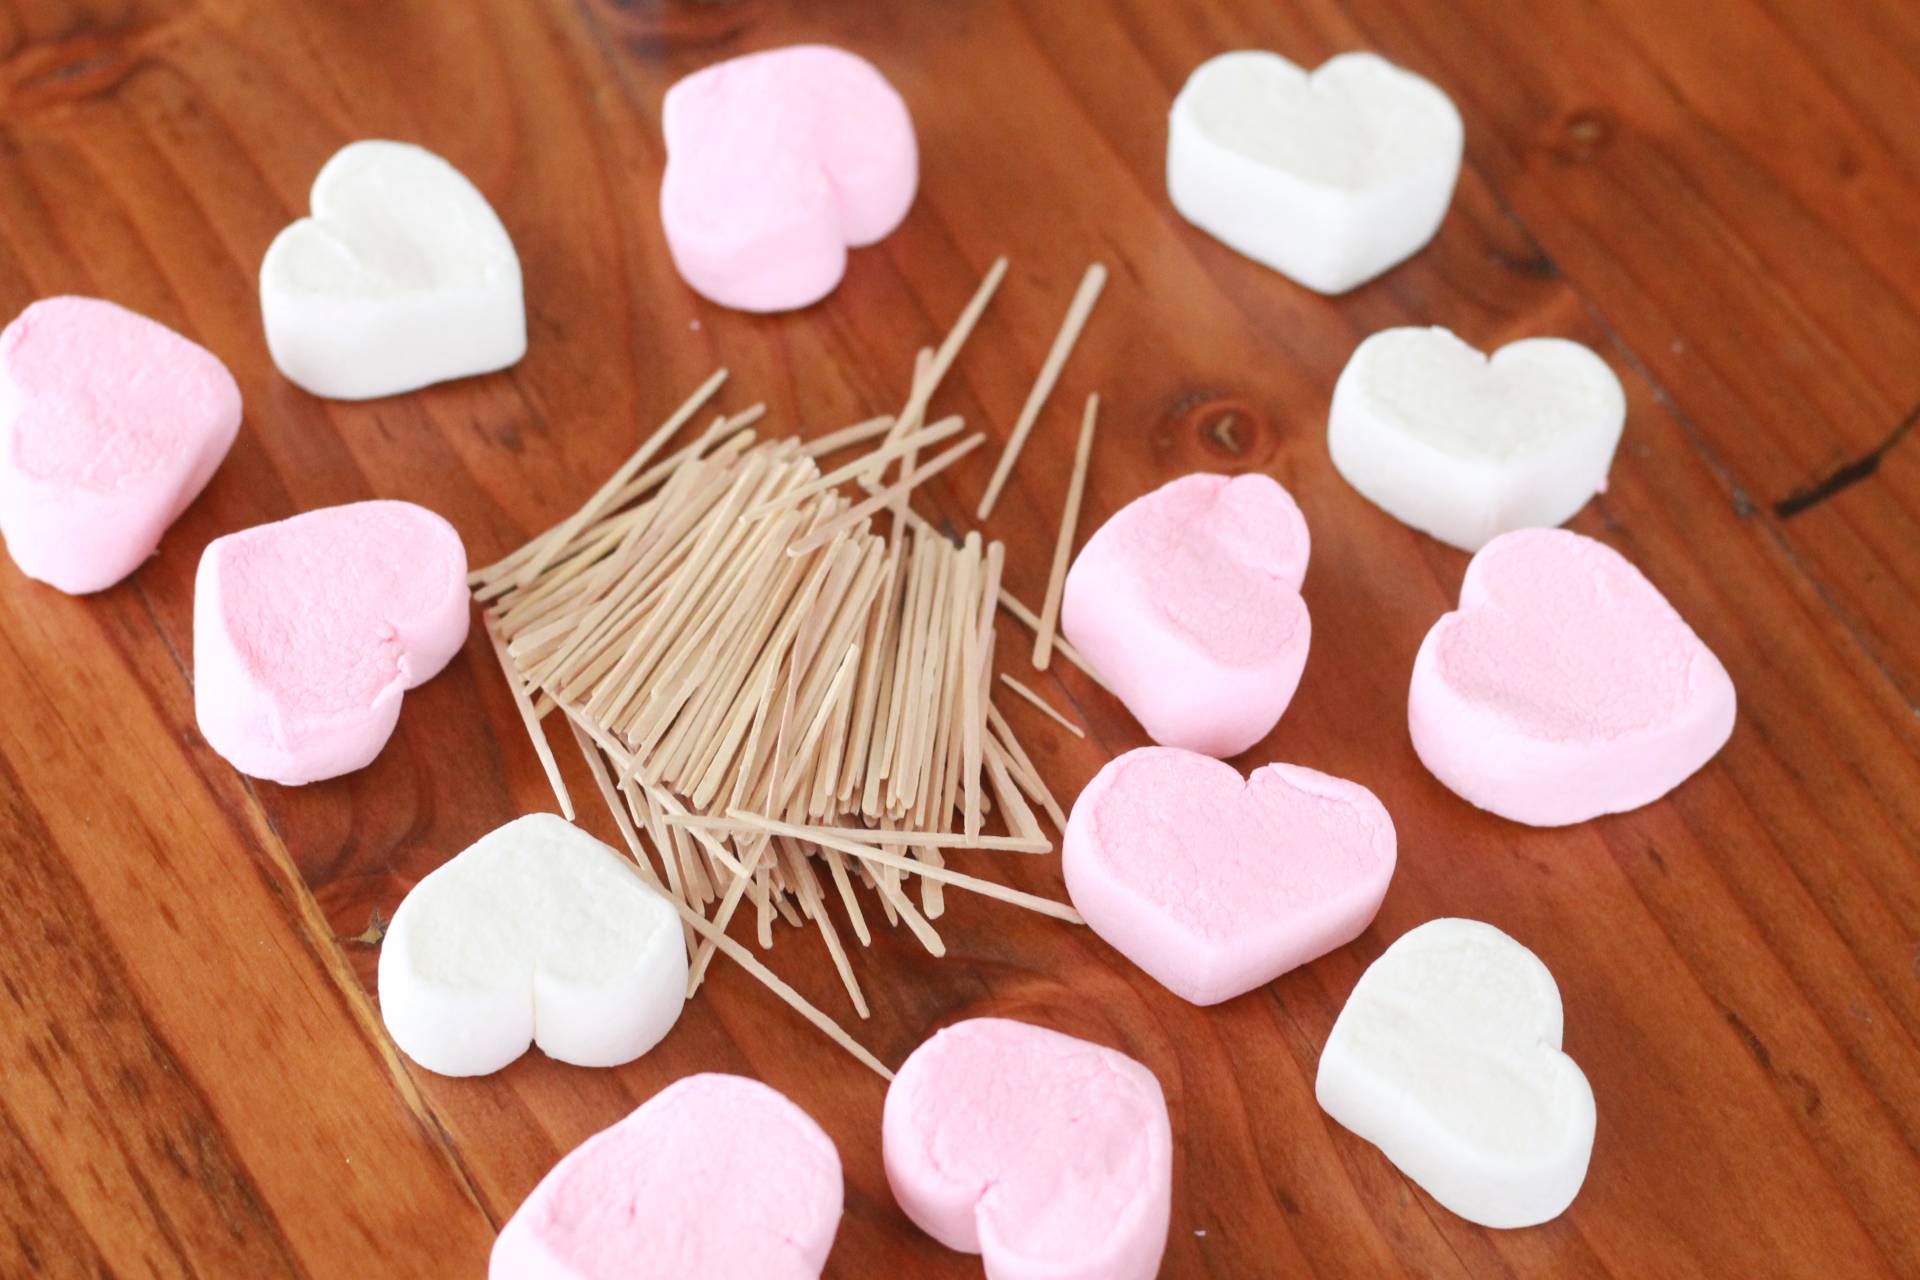 Marshmallow Heart Structure - Looking for educational toys, science kits, monthly crafts for kids, monthly subscriptions for kids, a monthly craft box or kids craft subscription? Green Kid Crafts, kids craft subscription and maker of the best subscription boxes, including award-winning arts and craft subscription boxes and best monthly subscription boxes has what you're looking for!